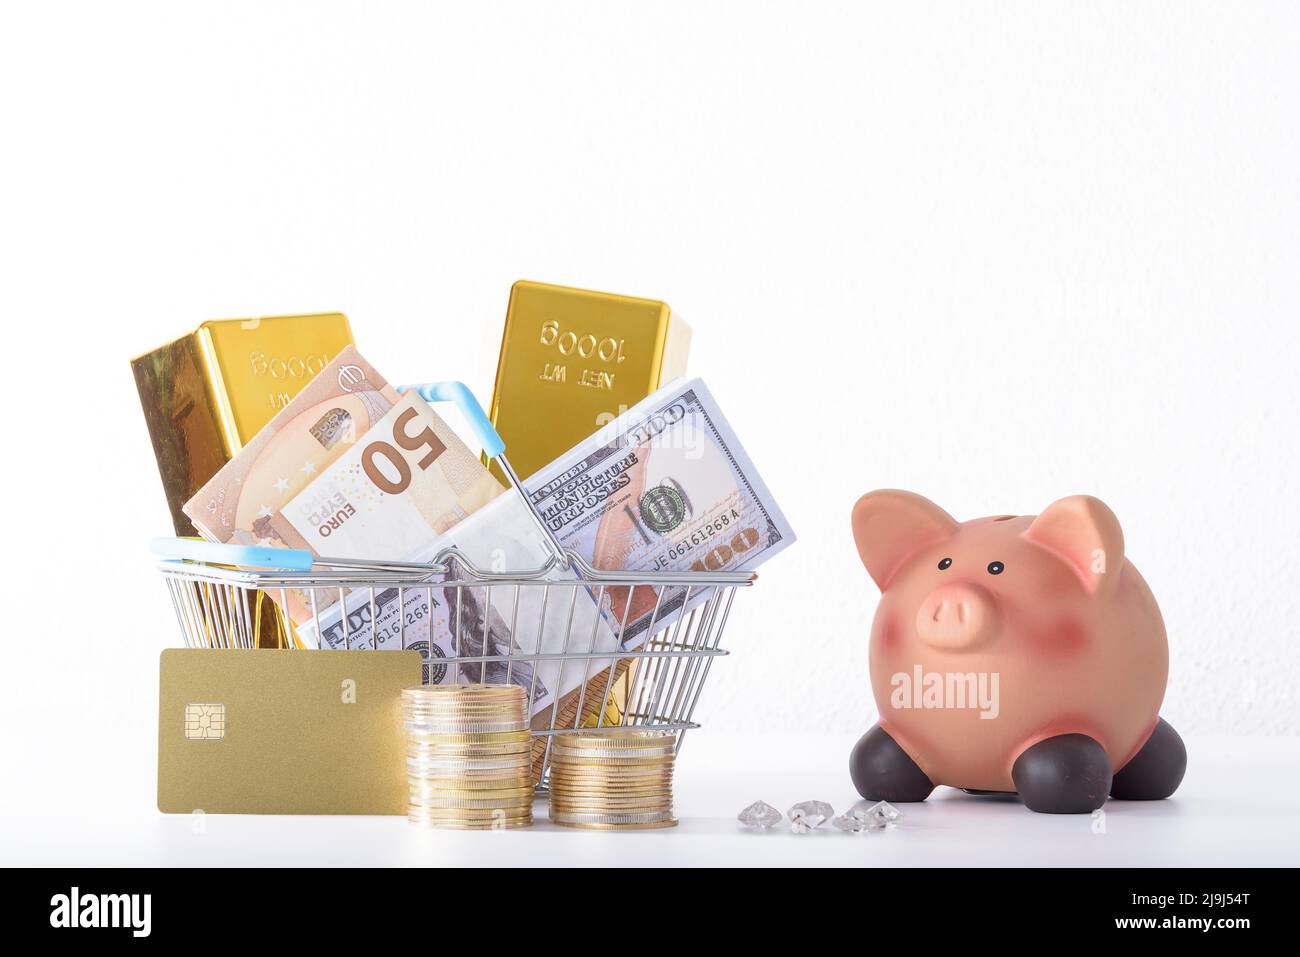 Piggy bank full of money. Coins and dollar bills. A symbol of accumulation and well-being. Purchase planning. Financial literacy. Stock Photo